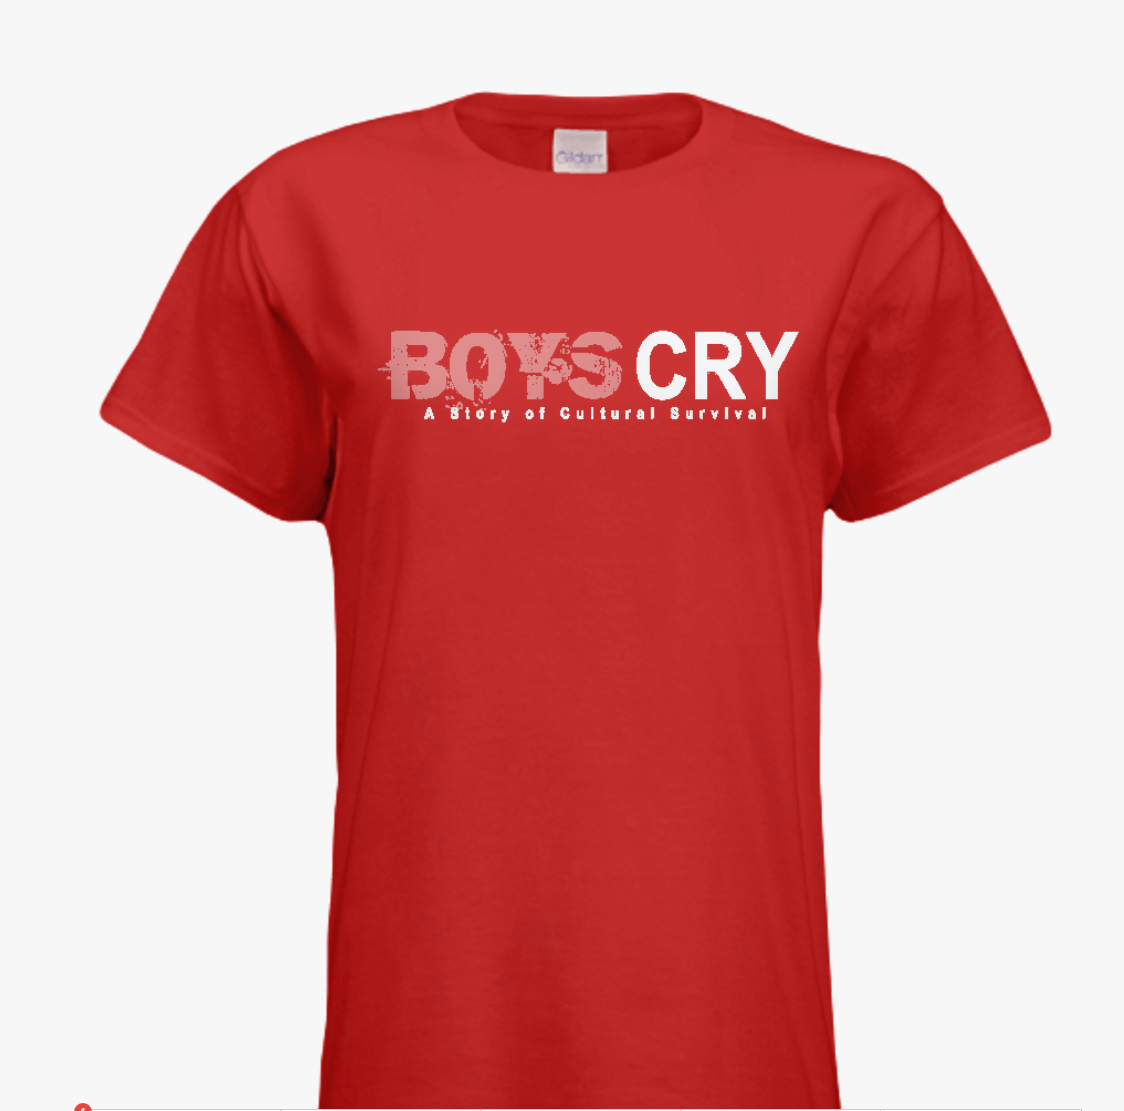 Boys Cry - Red T-shirt